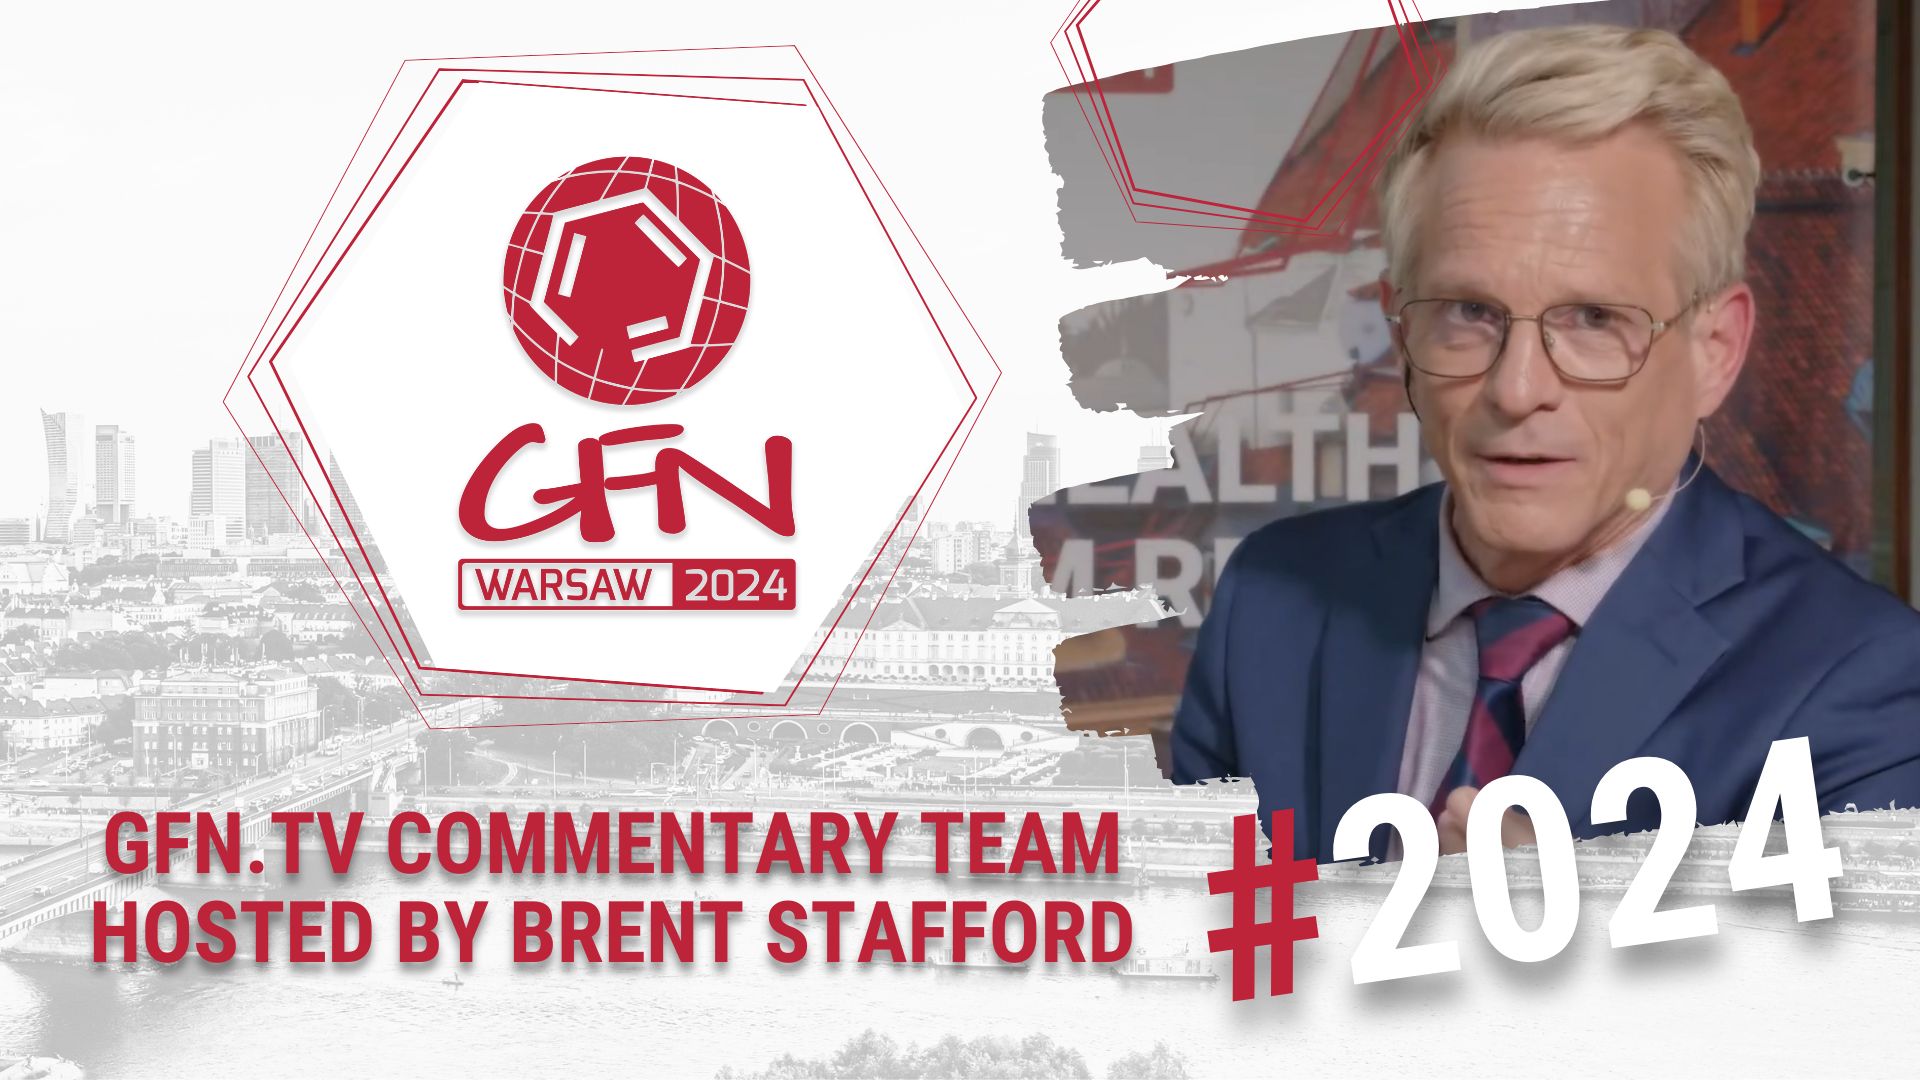 WHAT’S WRONG WITH THE COMMONWEALTH? | GFN24 Commentary Team hosted by Brent Stafford